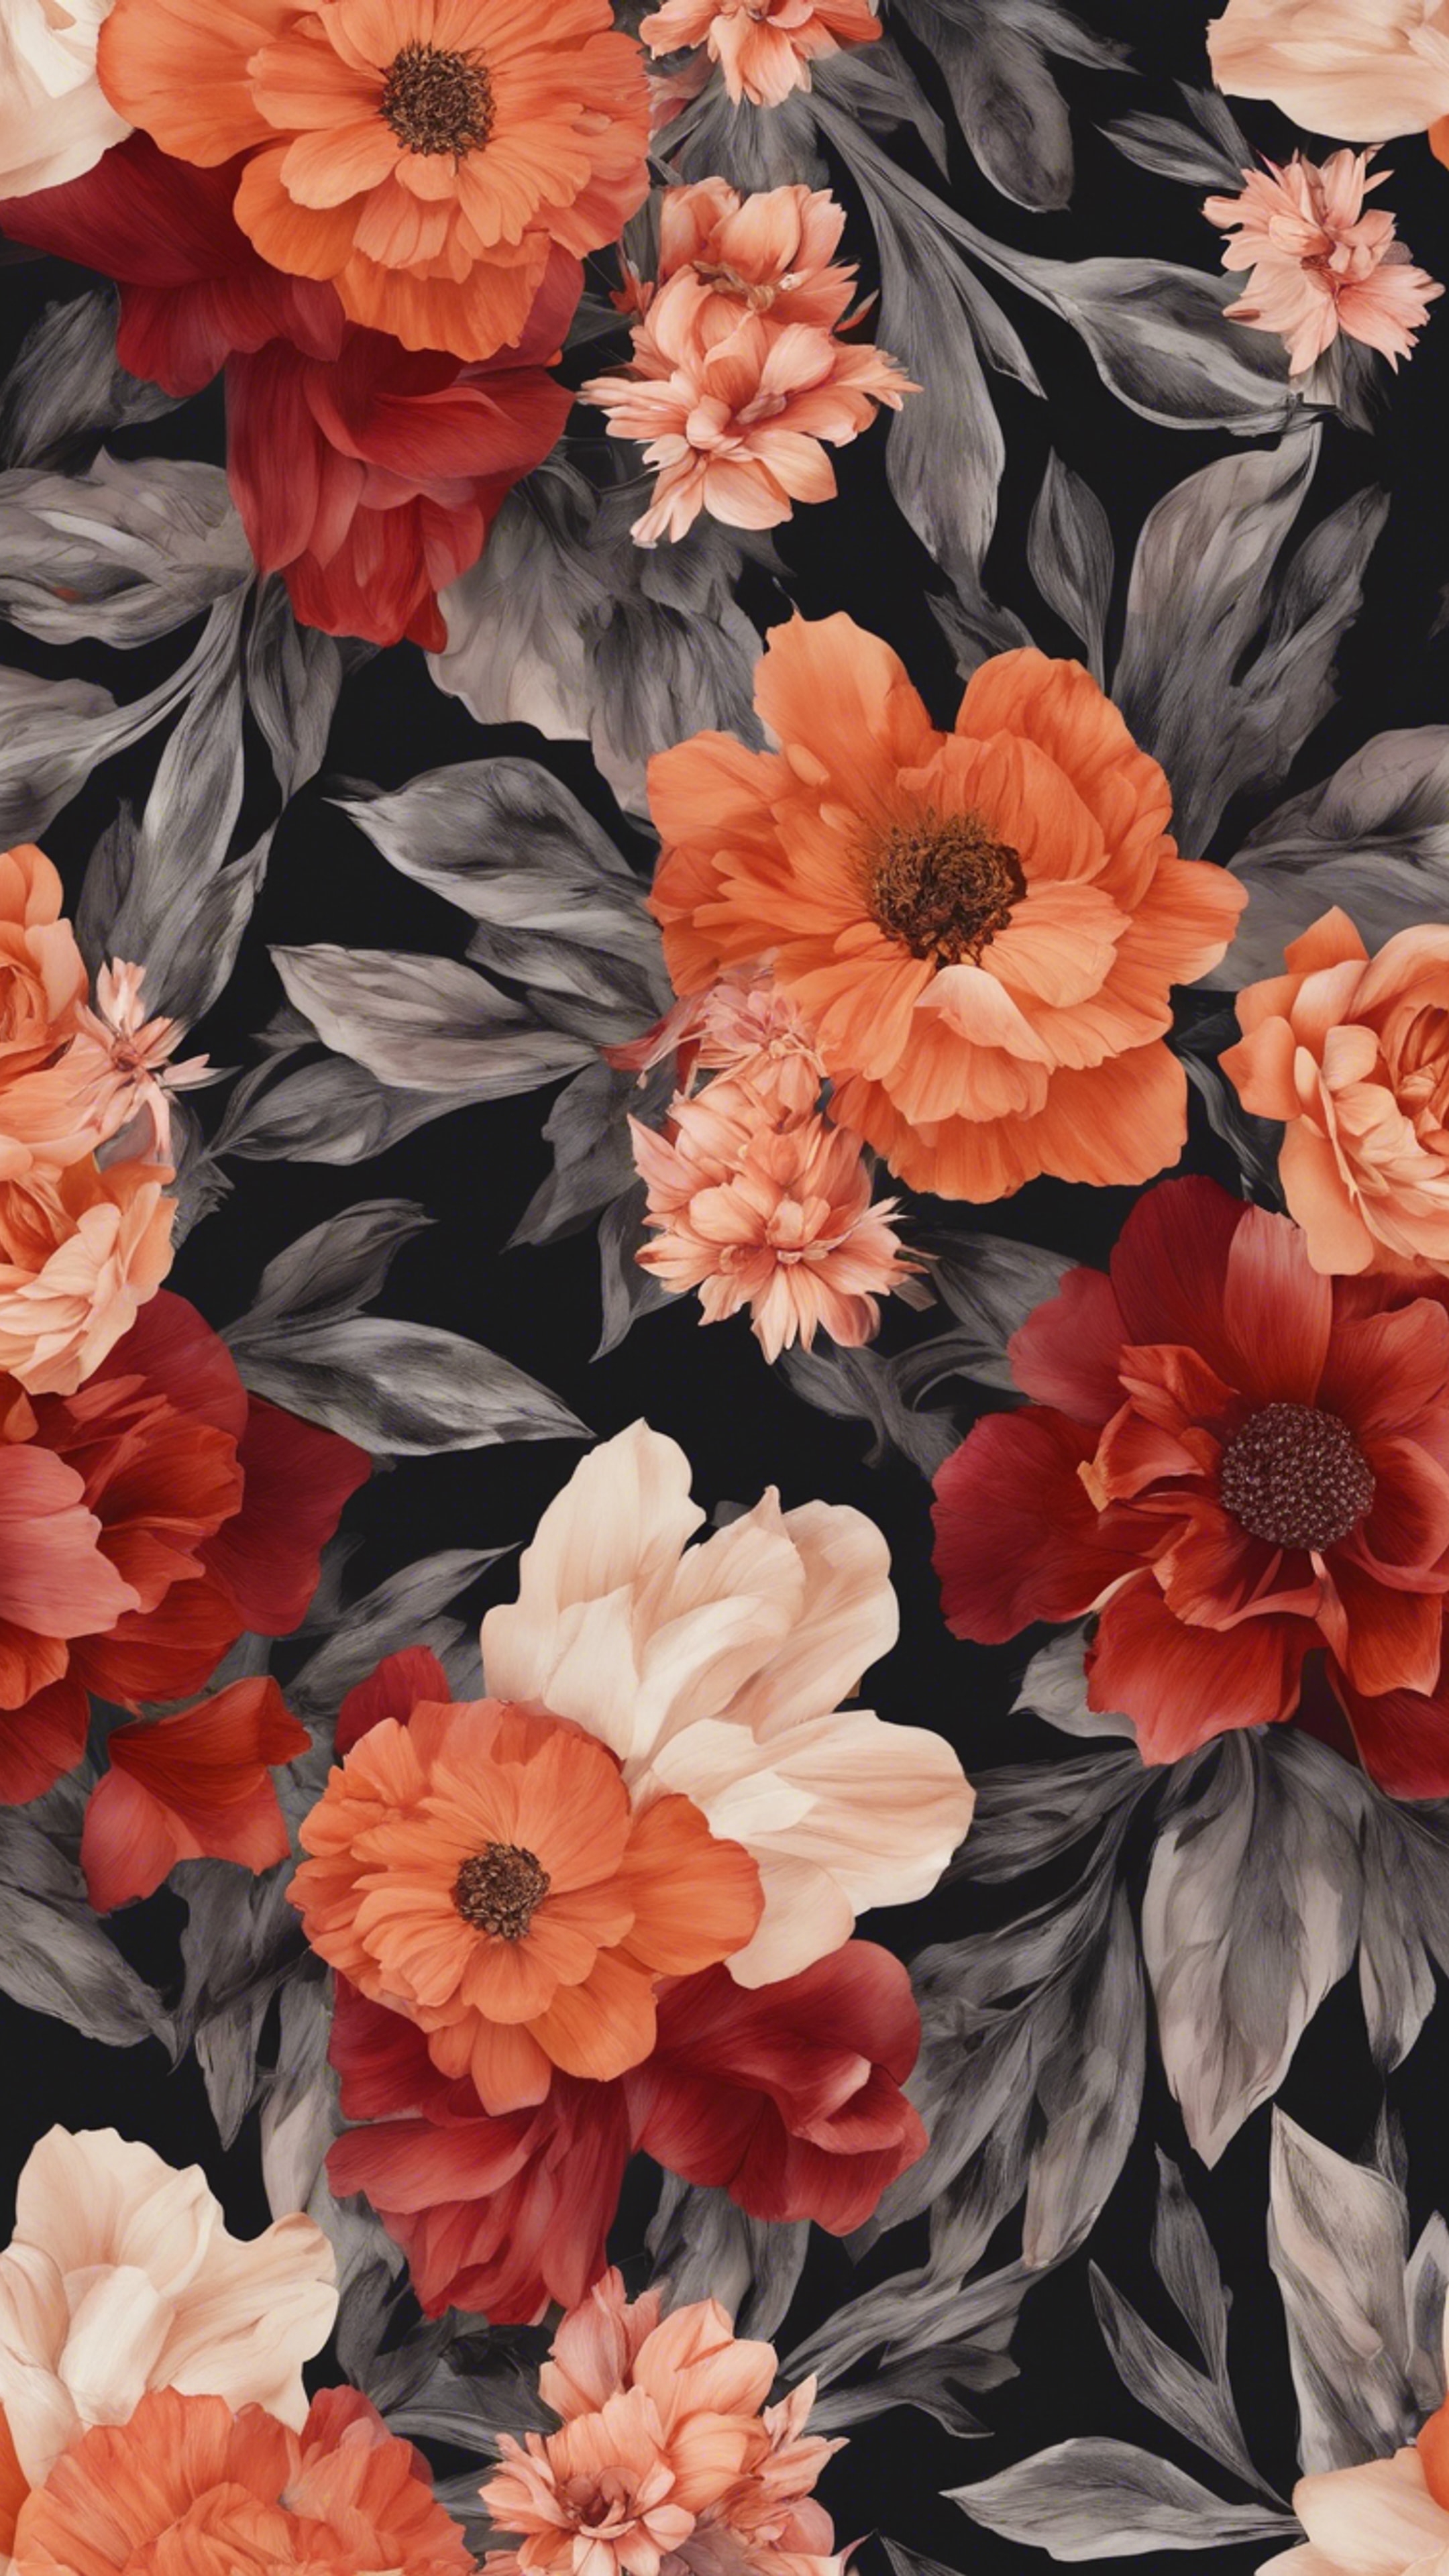 Seamless floral pattern with red and orange flowers that have a gradient effect. Hintergrund[2b8b1301f068420e9b5a]